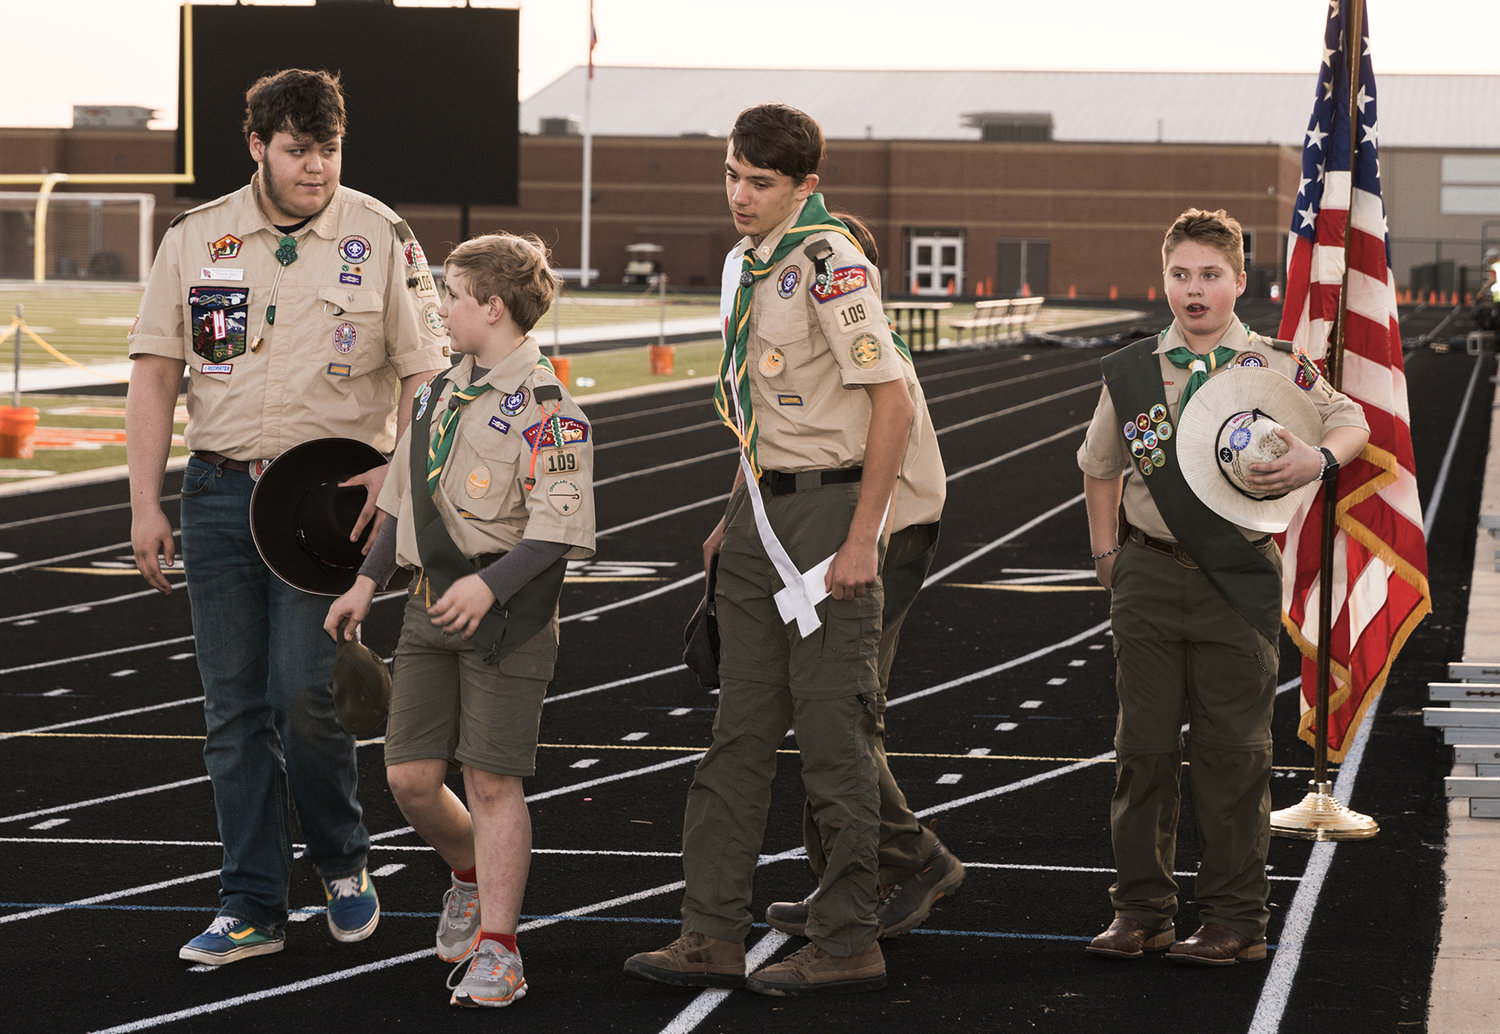 Members of Boy Scout Troop 109 presented the United States flag.